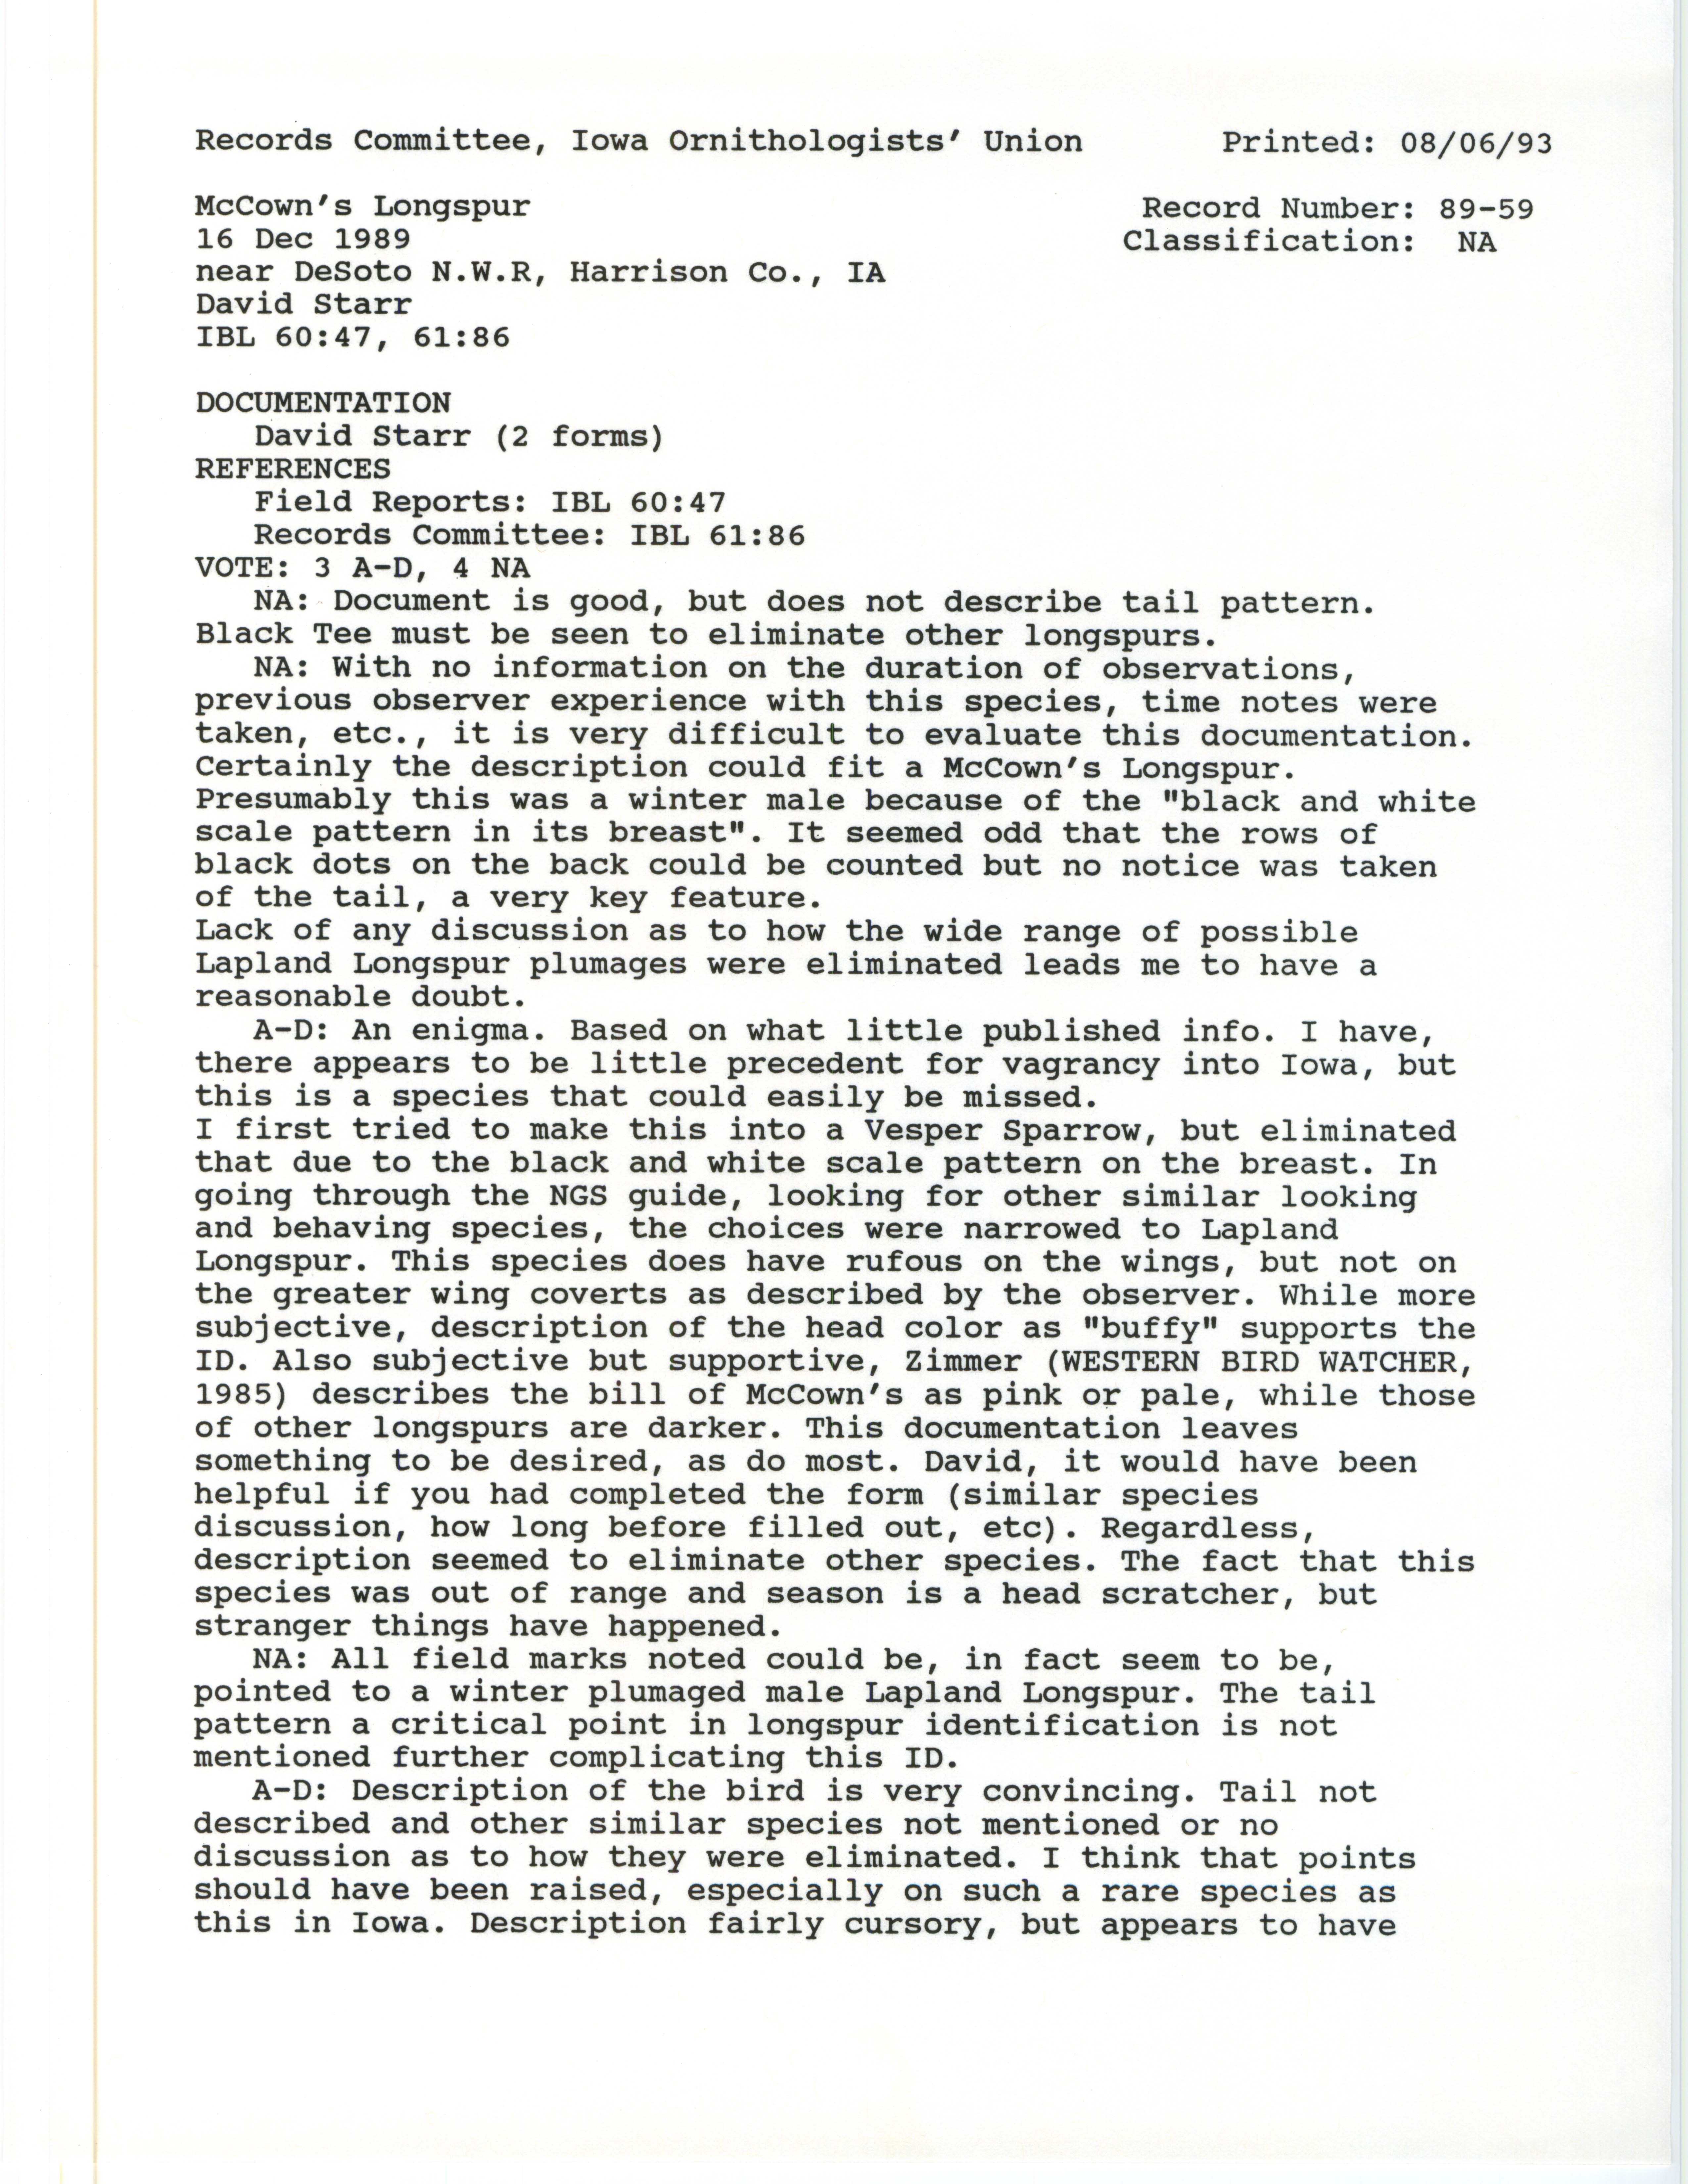 Records Committee review for rare bird sighting for McCown's Longspur near De Soto National Wildlife Reserve, 1989